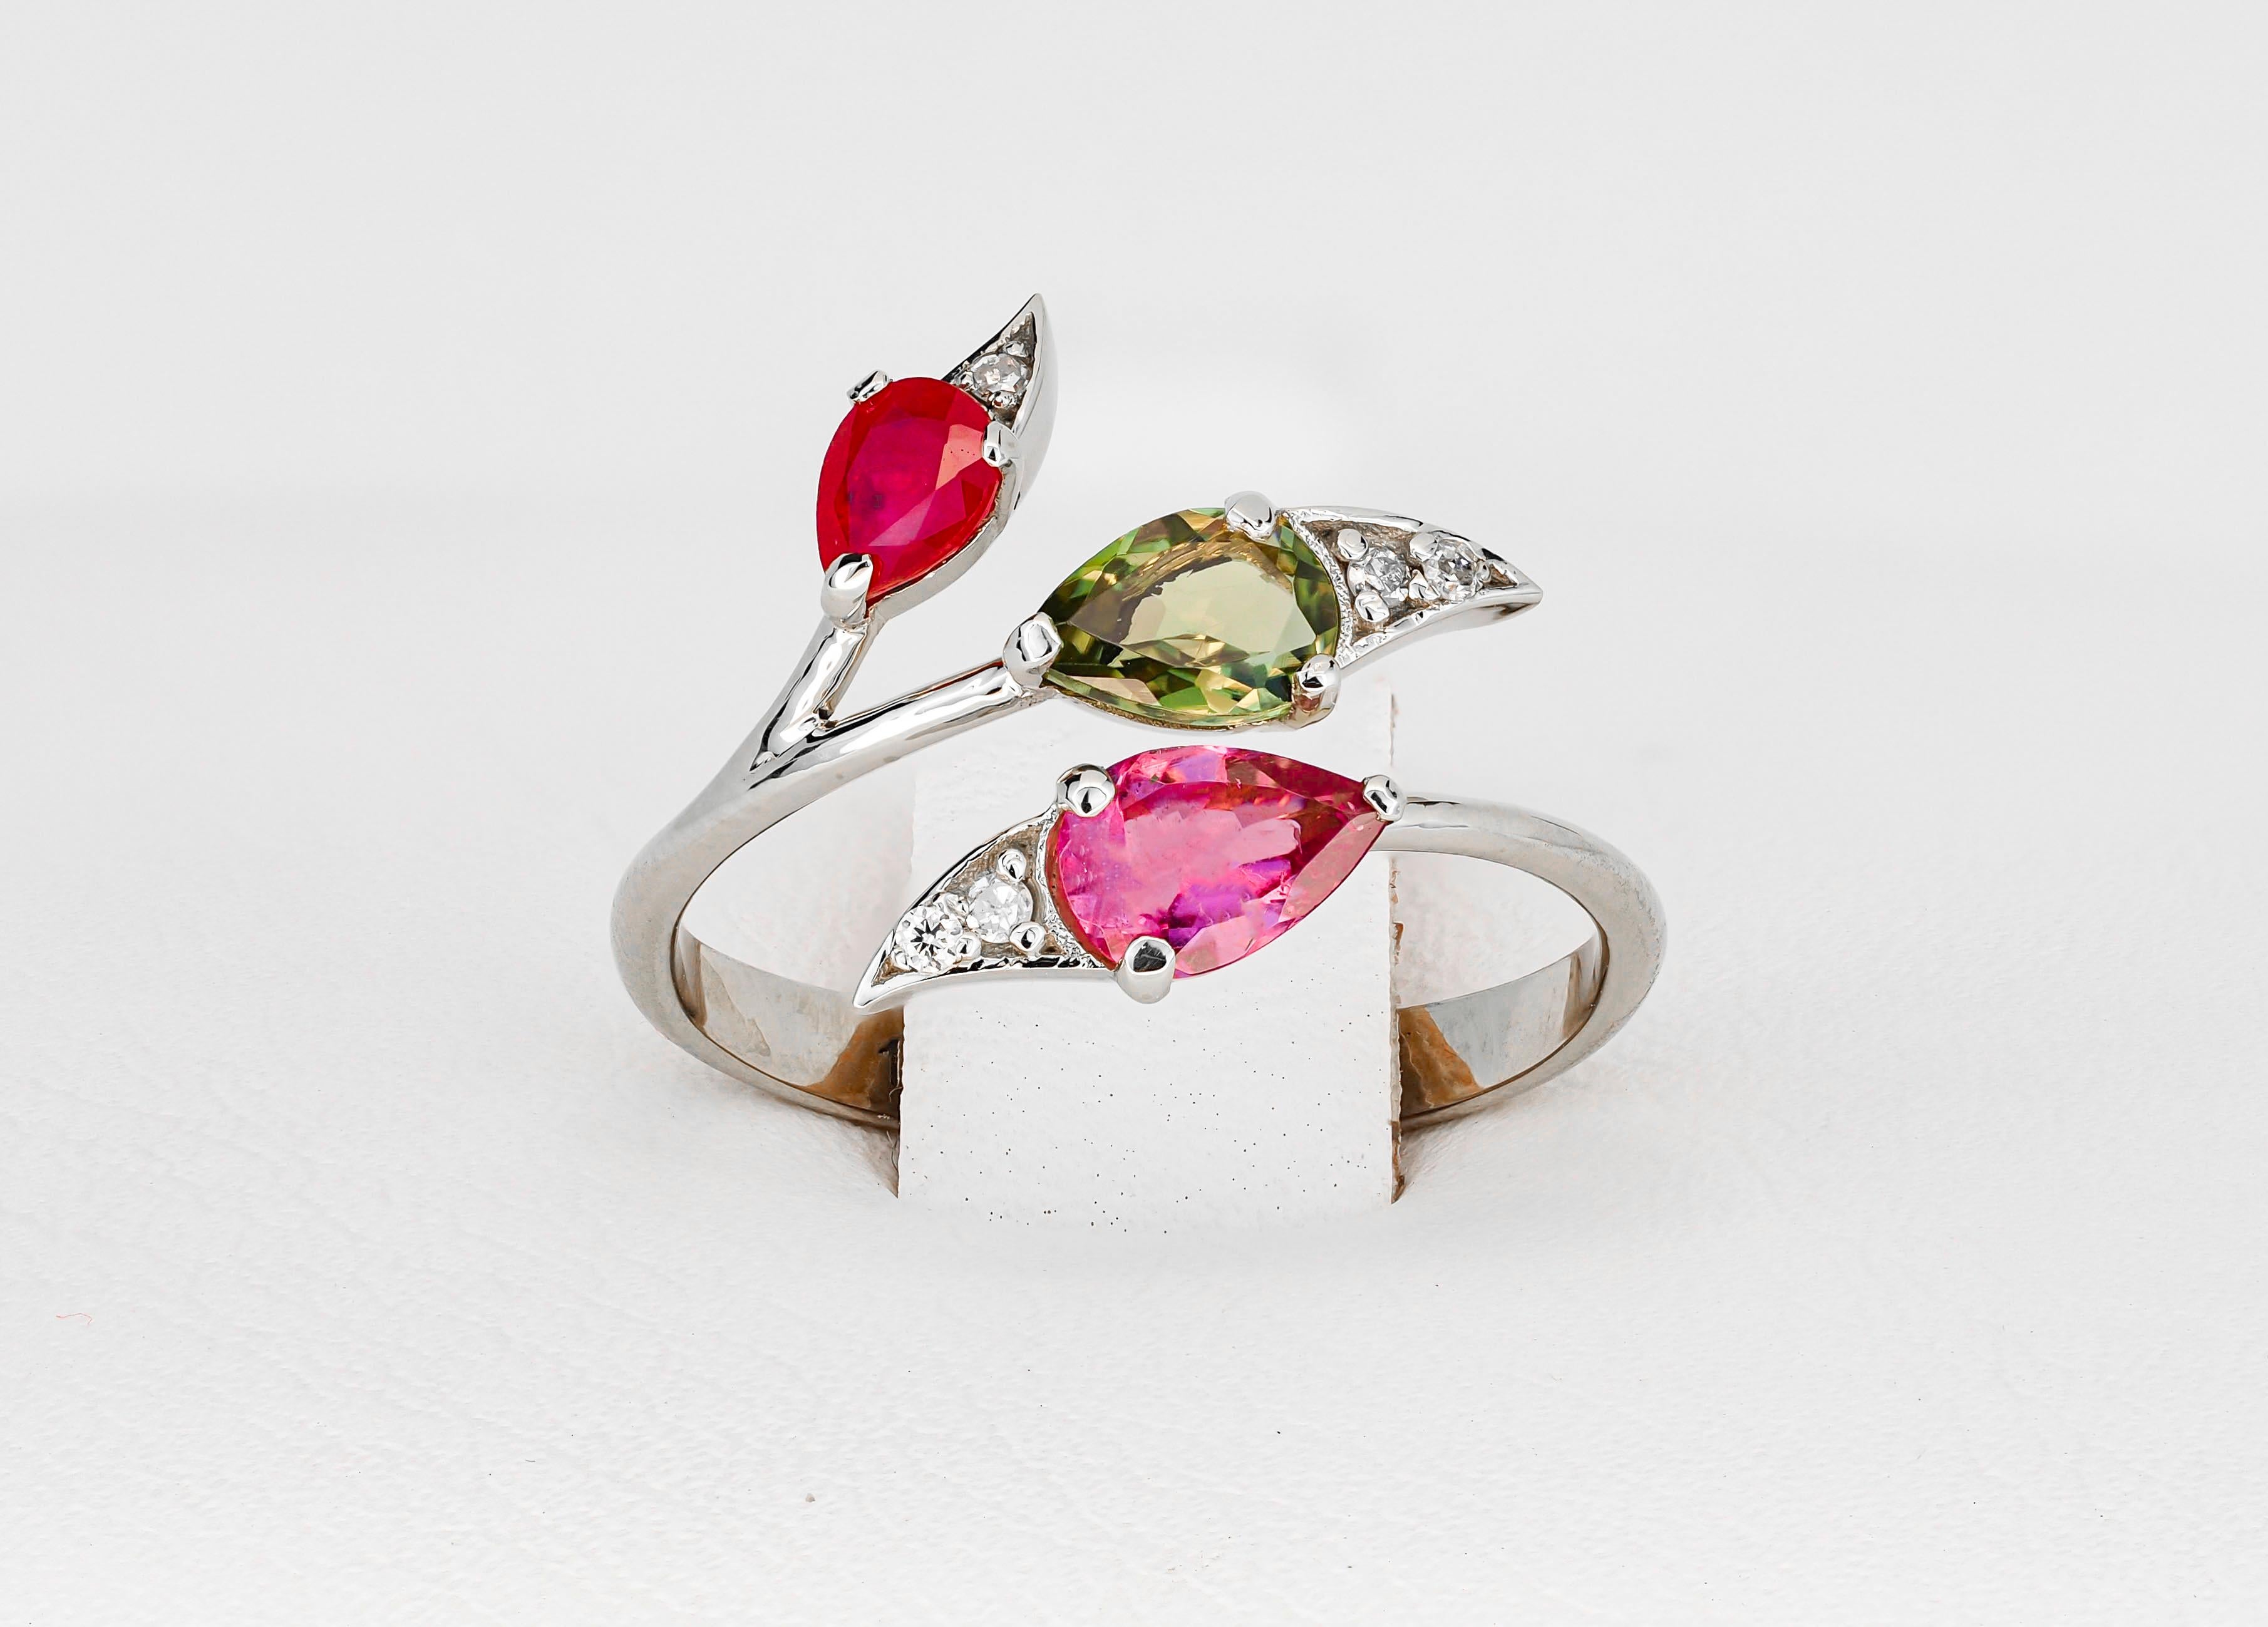 For Sale:  3 gemstone ring. Tourmalines and ruby gold ring. Multicolor gemstones ring. 9